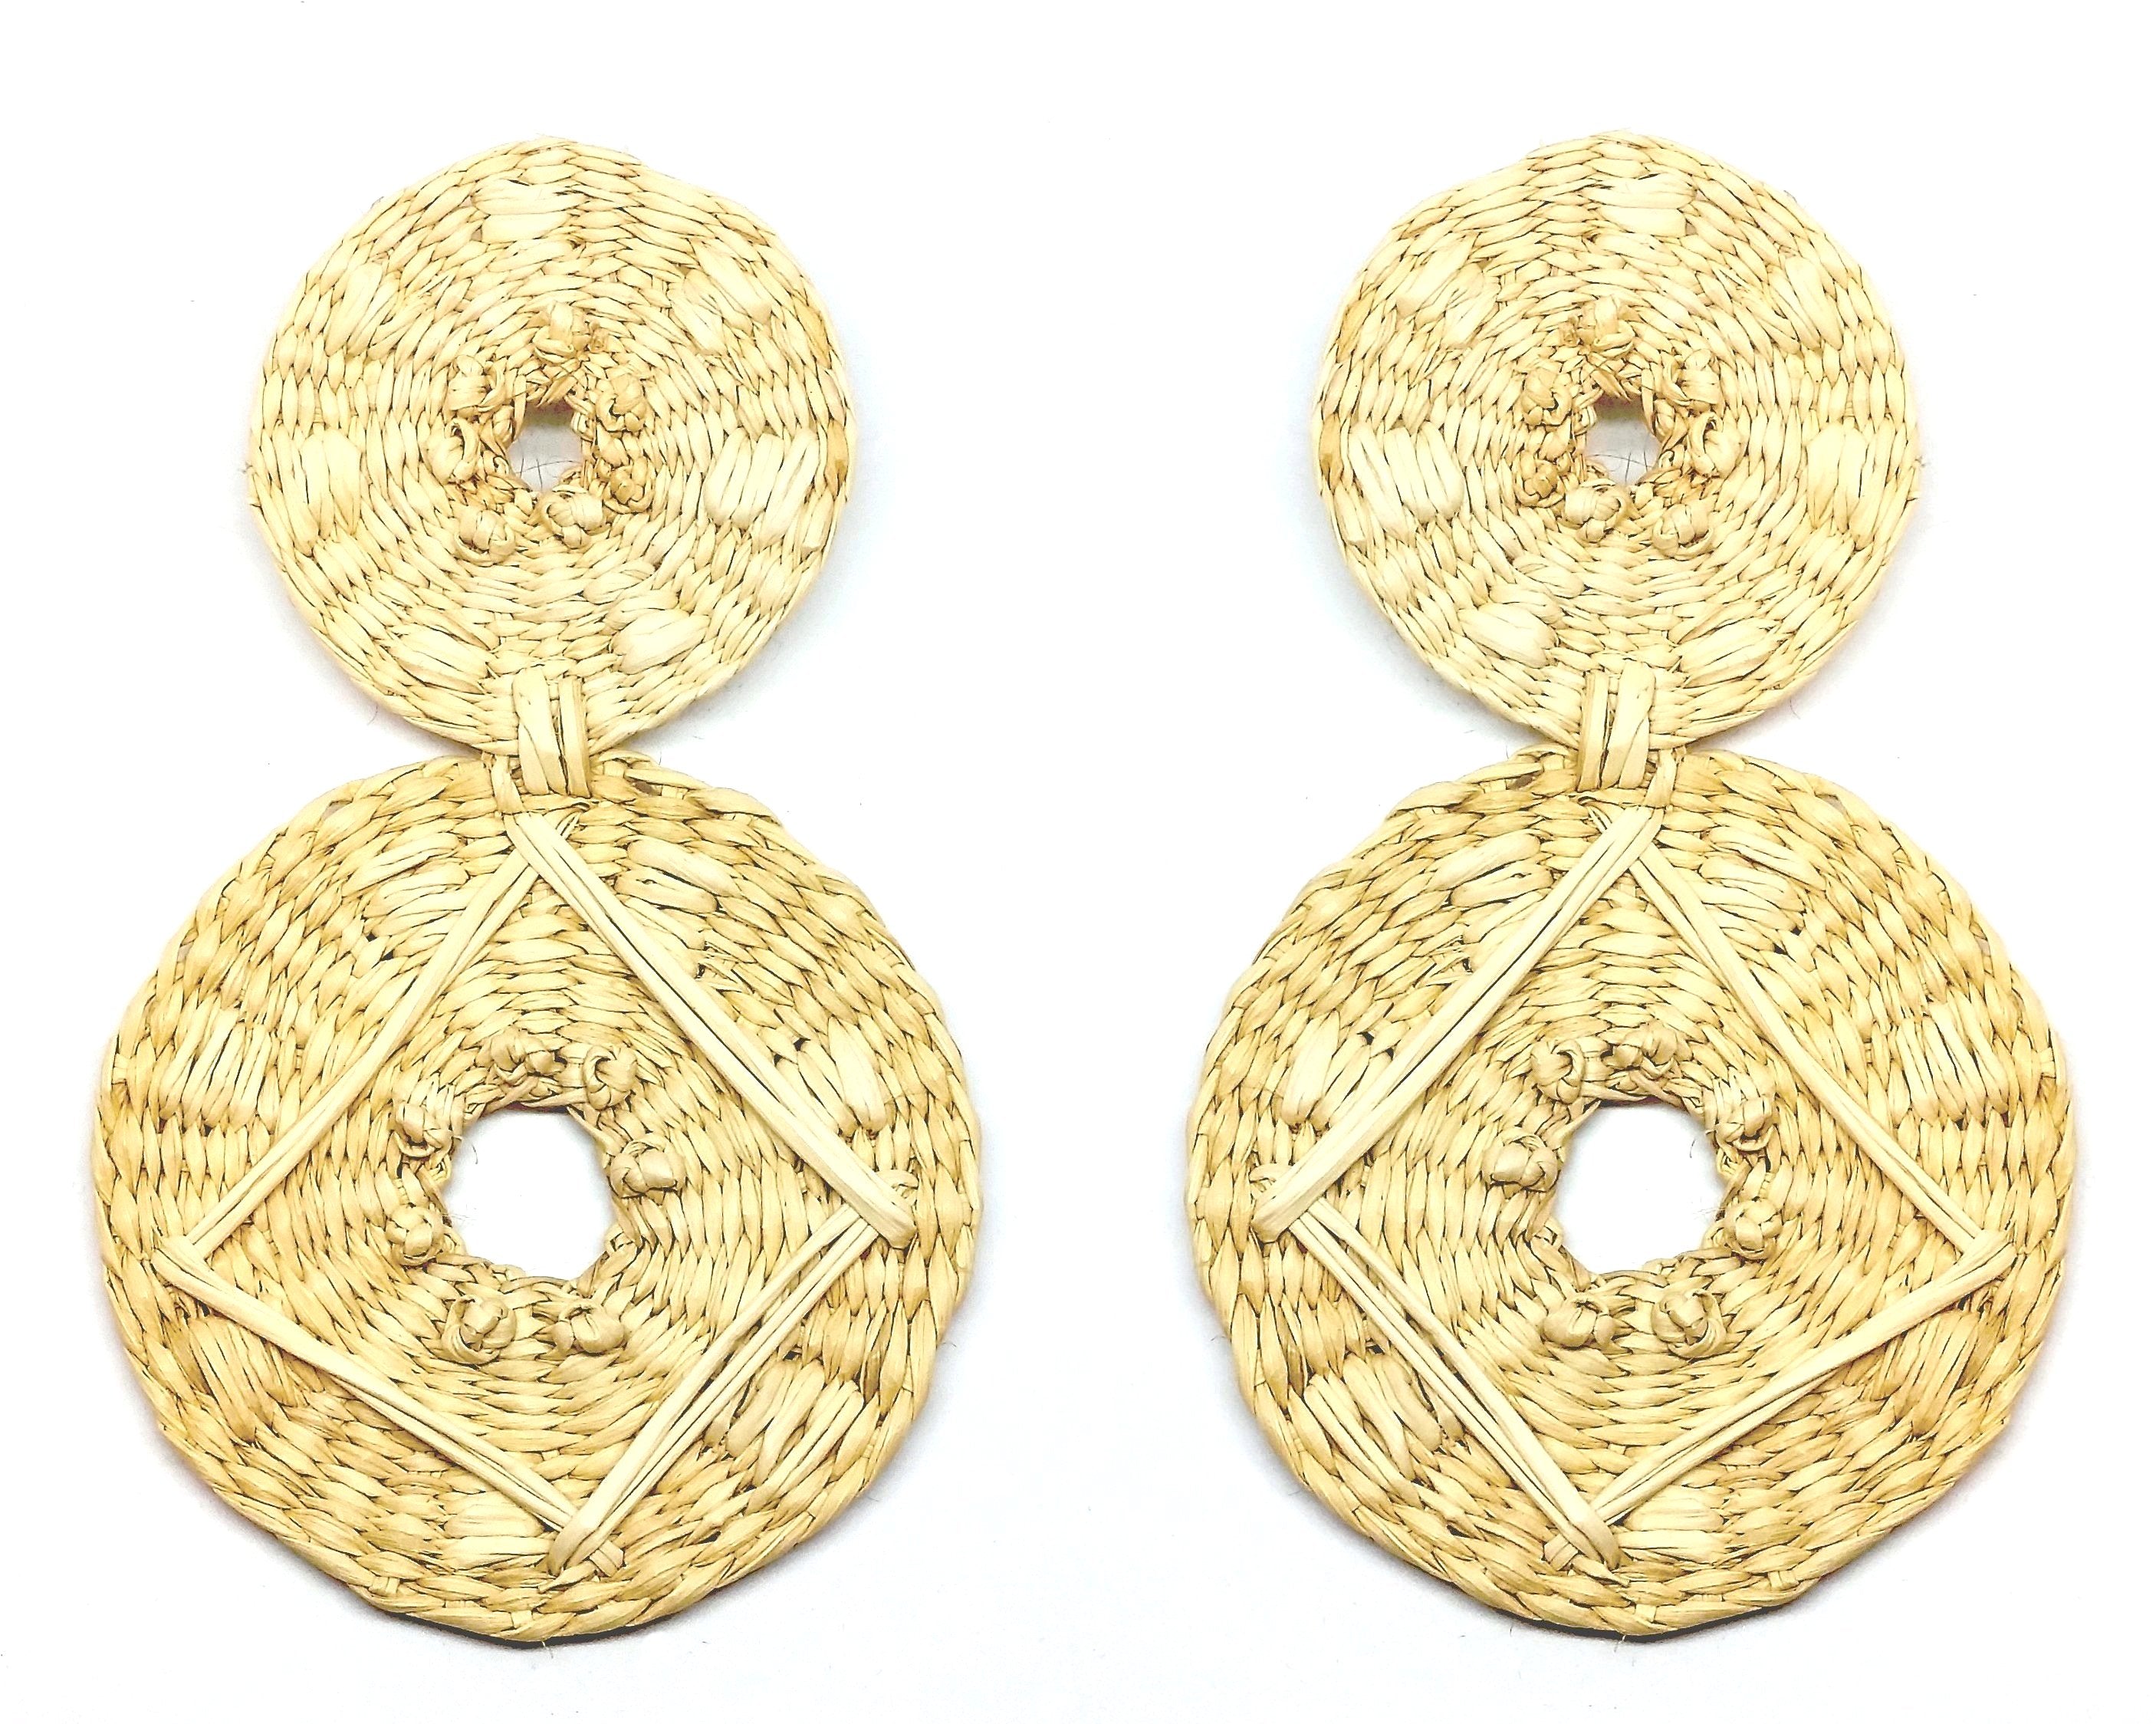 Large double disc raffia earrings in Natural with embroidered design